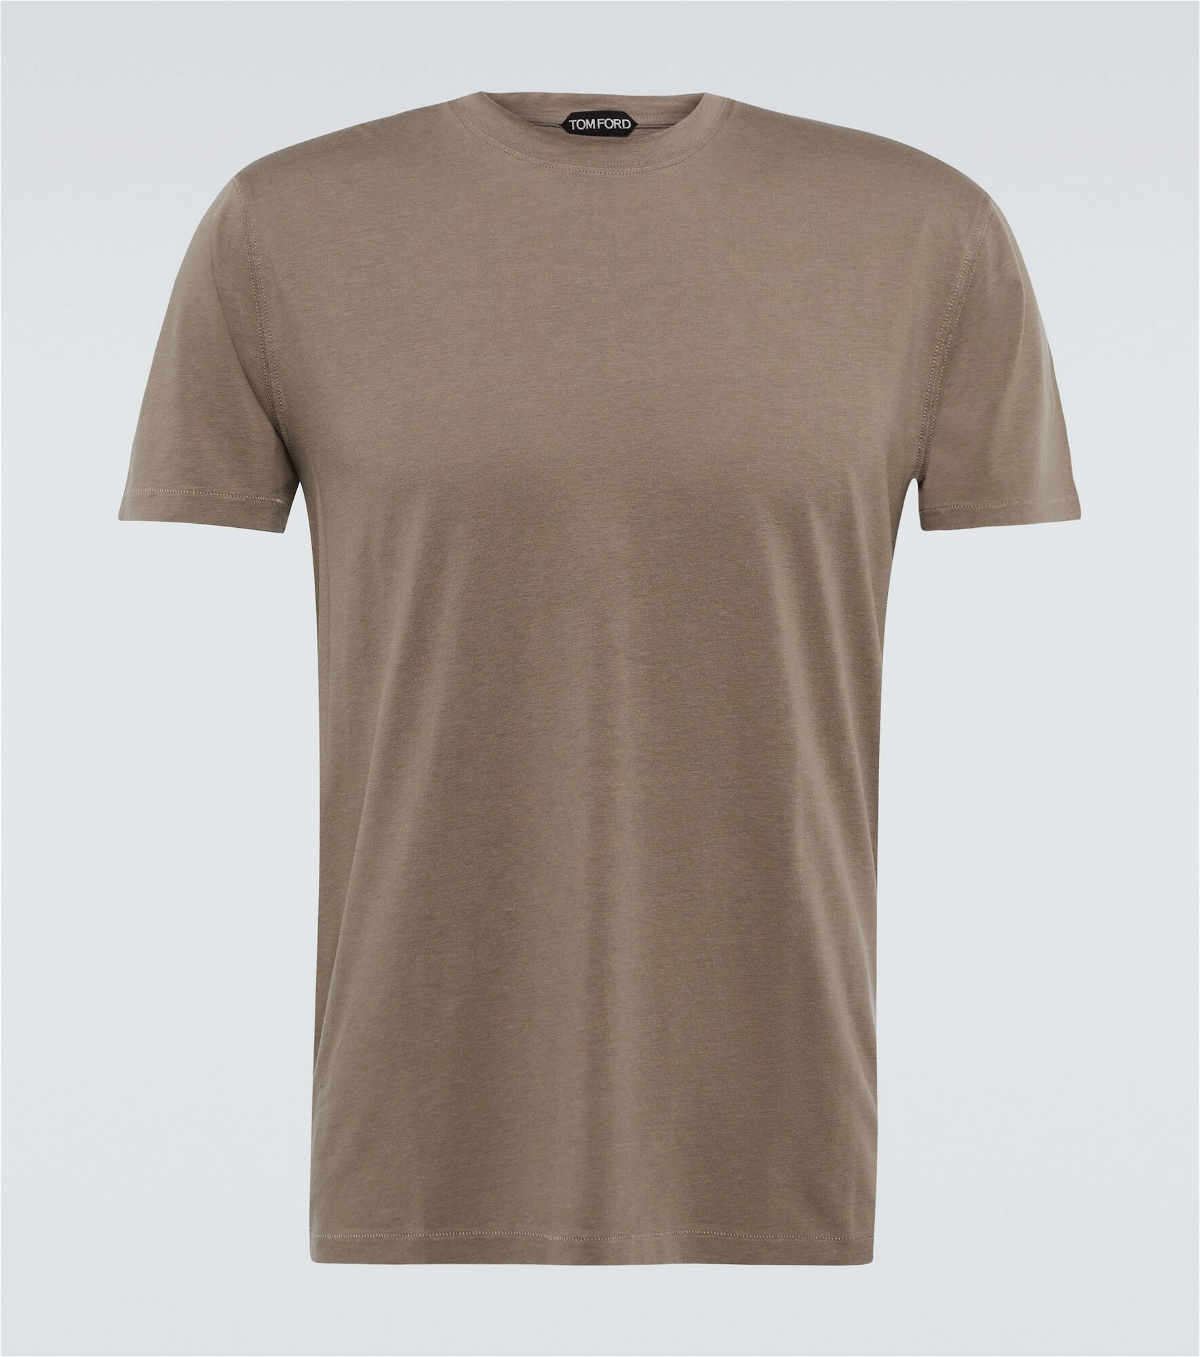 Tom Ford - Short-sleeved jersey T-shirt TOM FORD